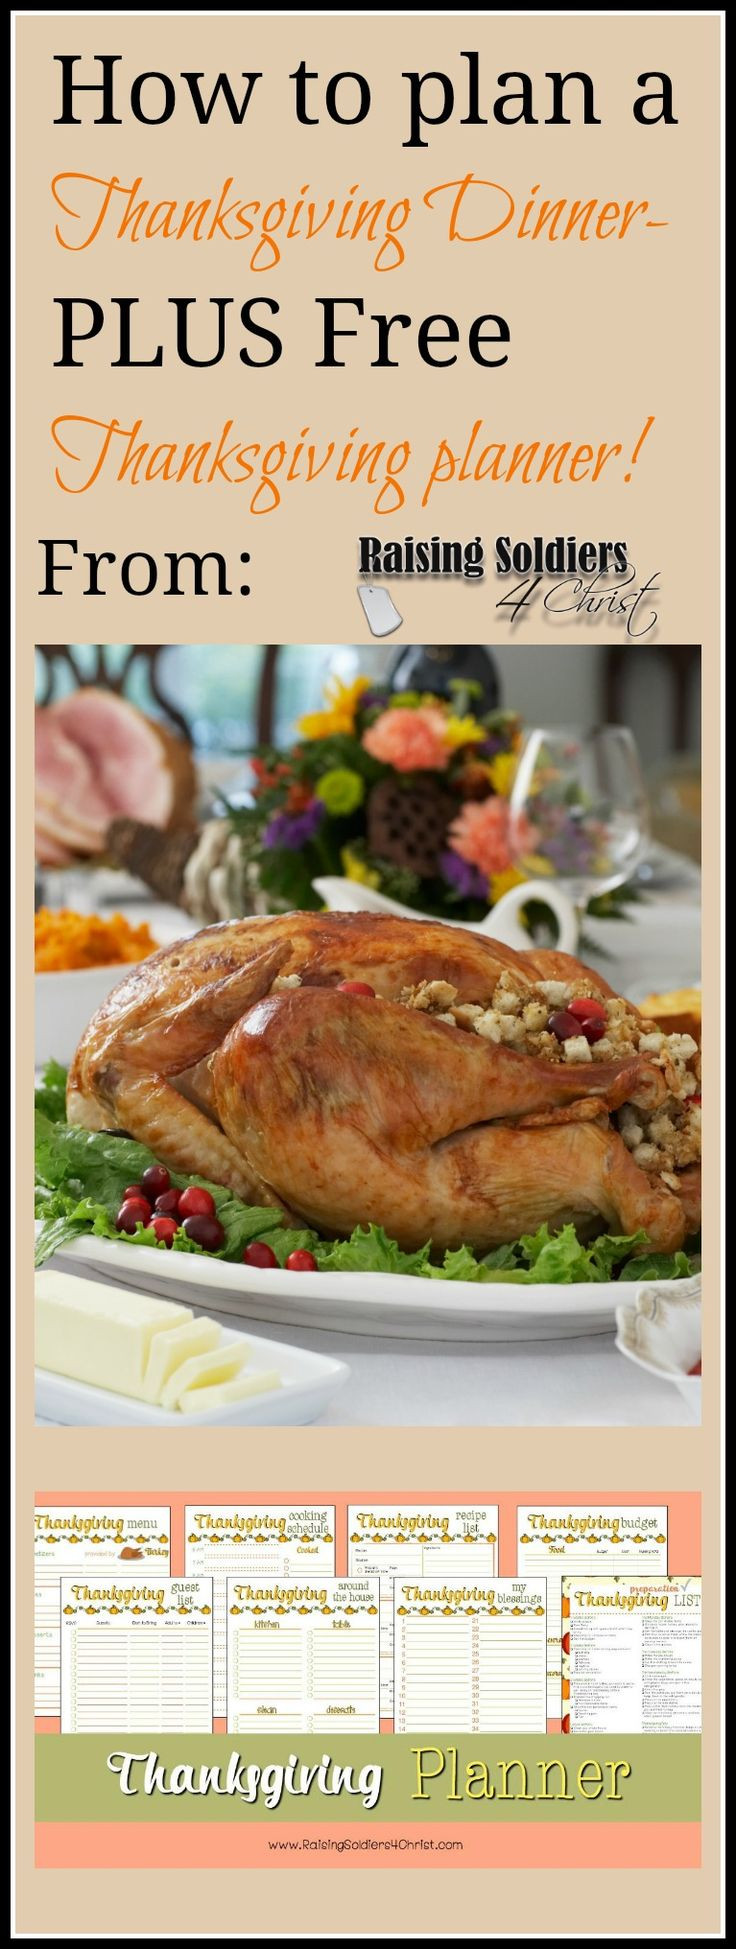 Planning Thanksgiving Dinner
 How to plan a Thanksgiving dinner Free Printable